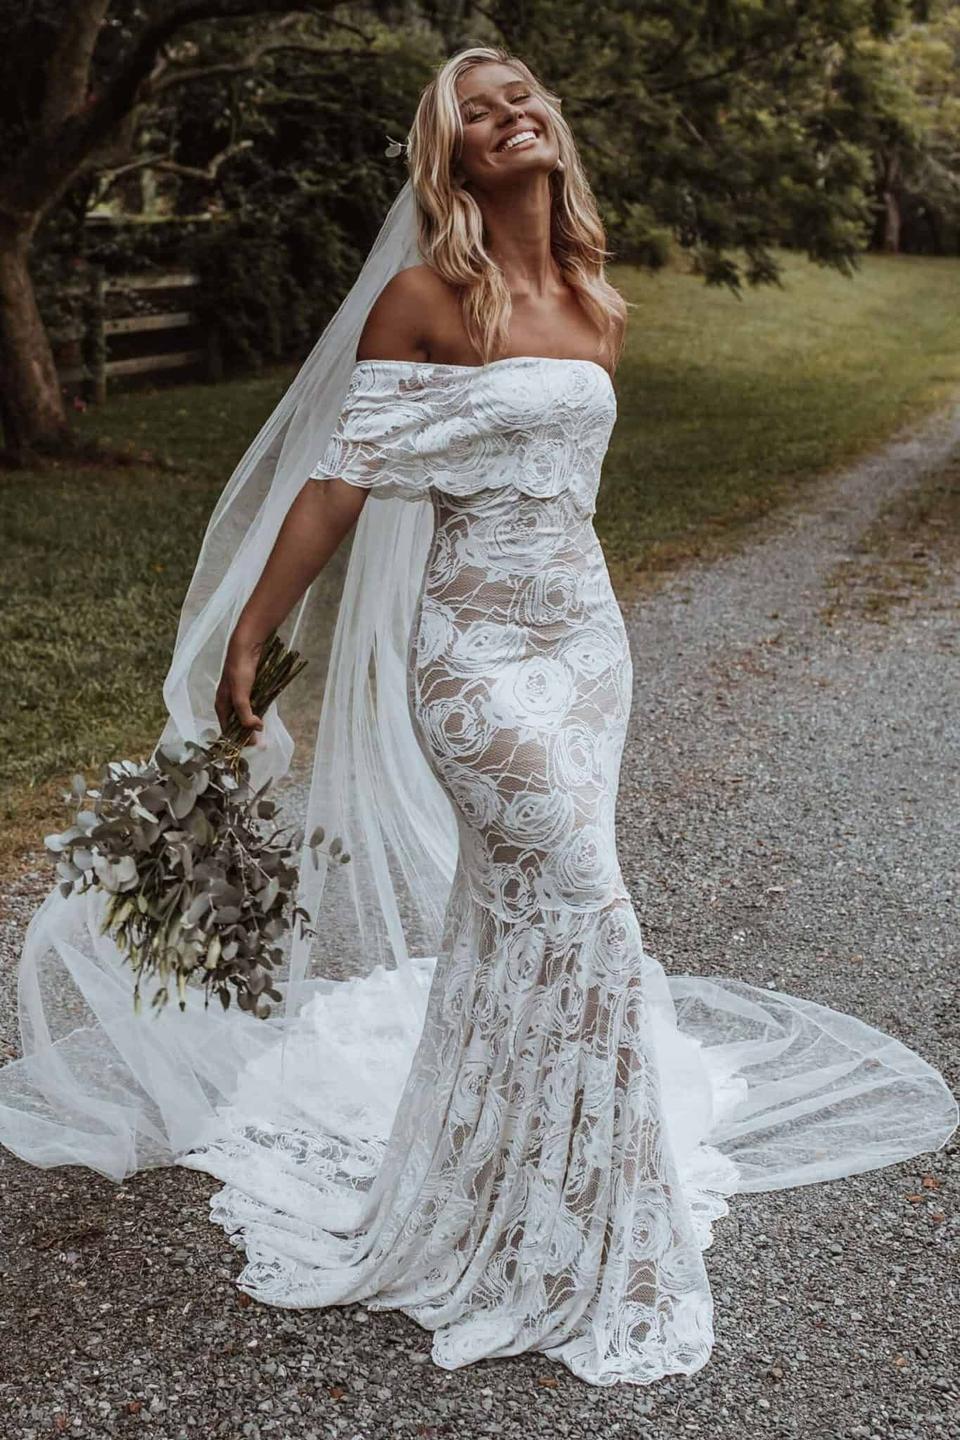 43 Gorgeous Off the Shoulder Wedding Dresses - hitched.co.uk - hitched ...